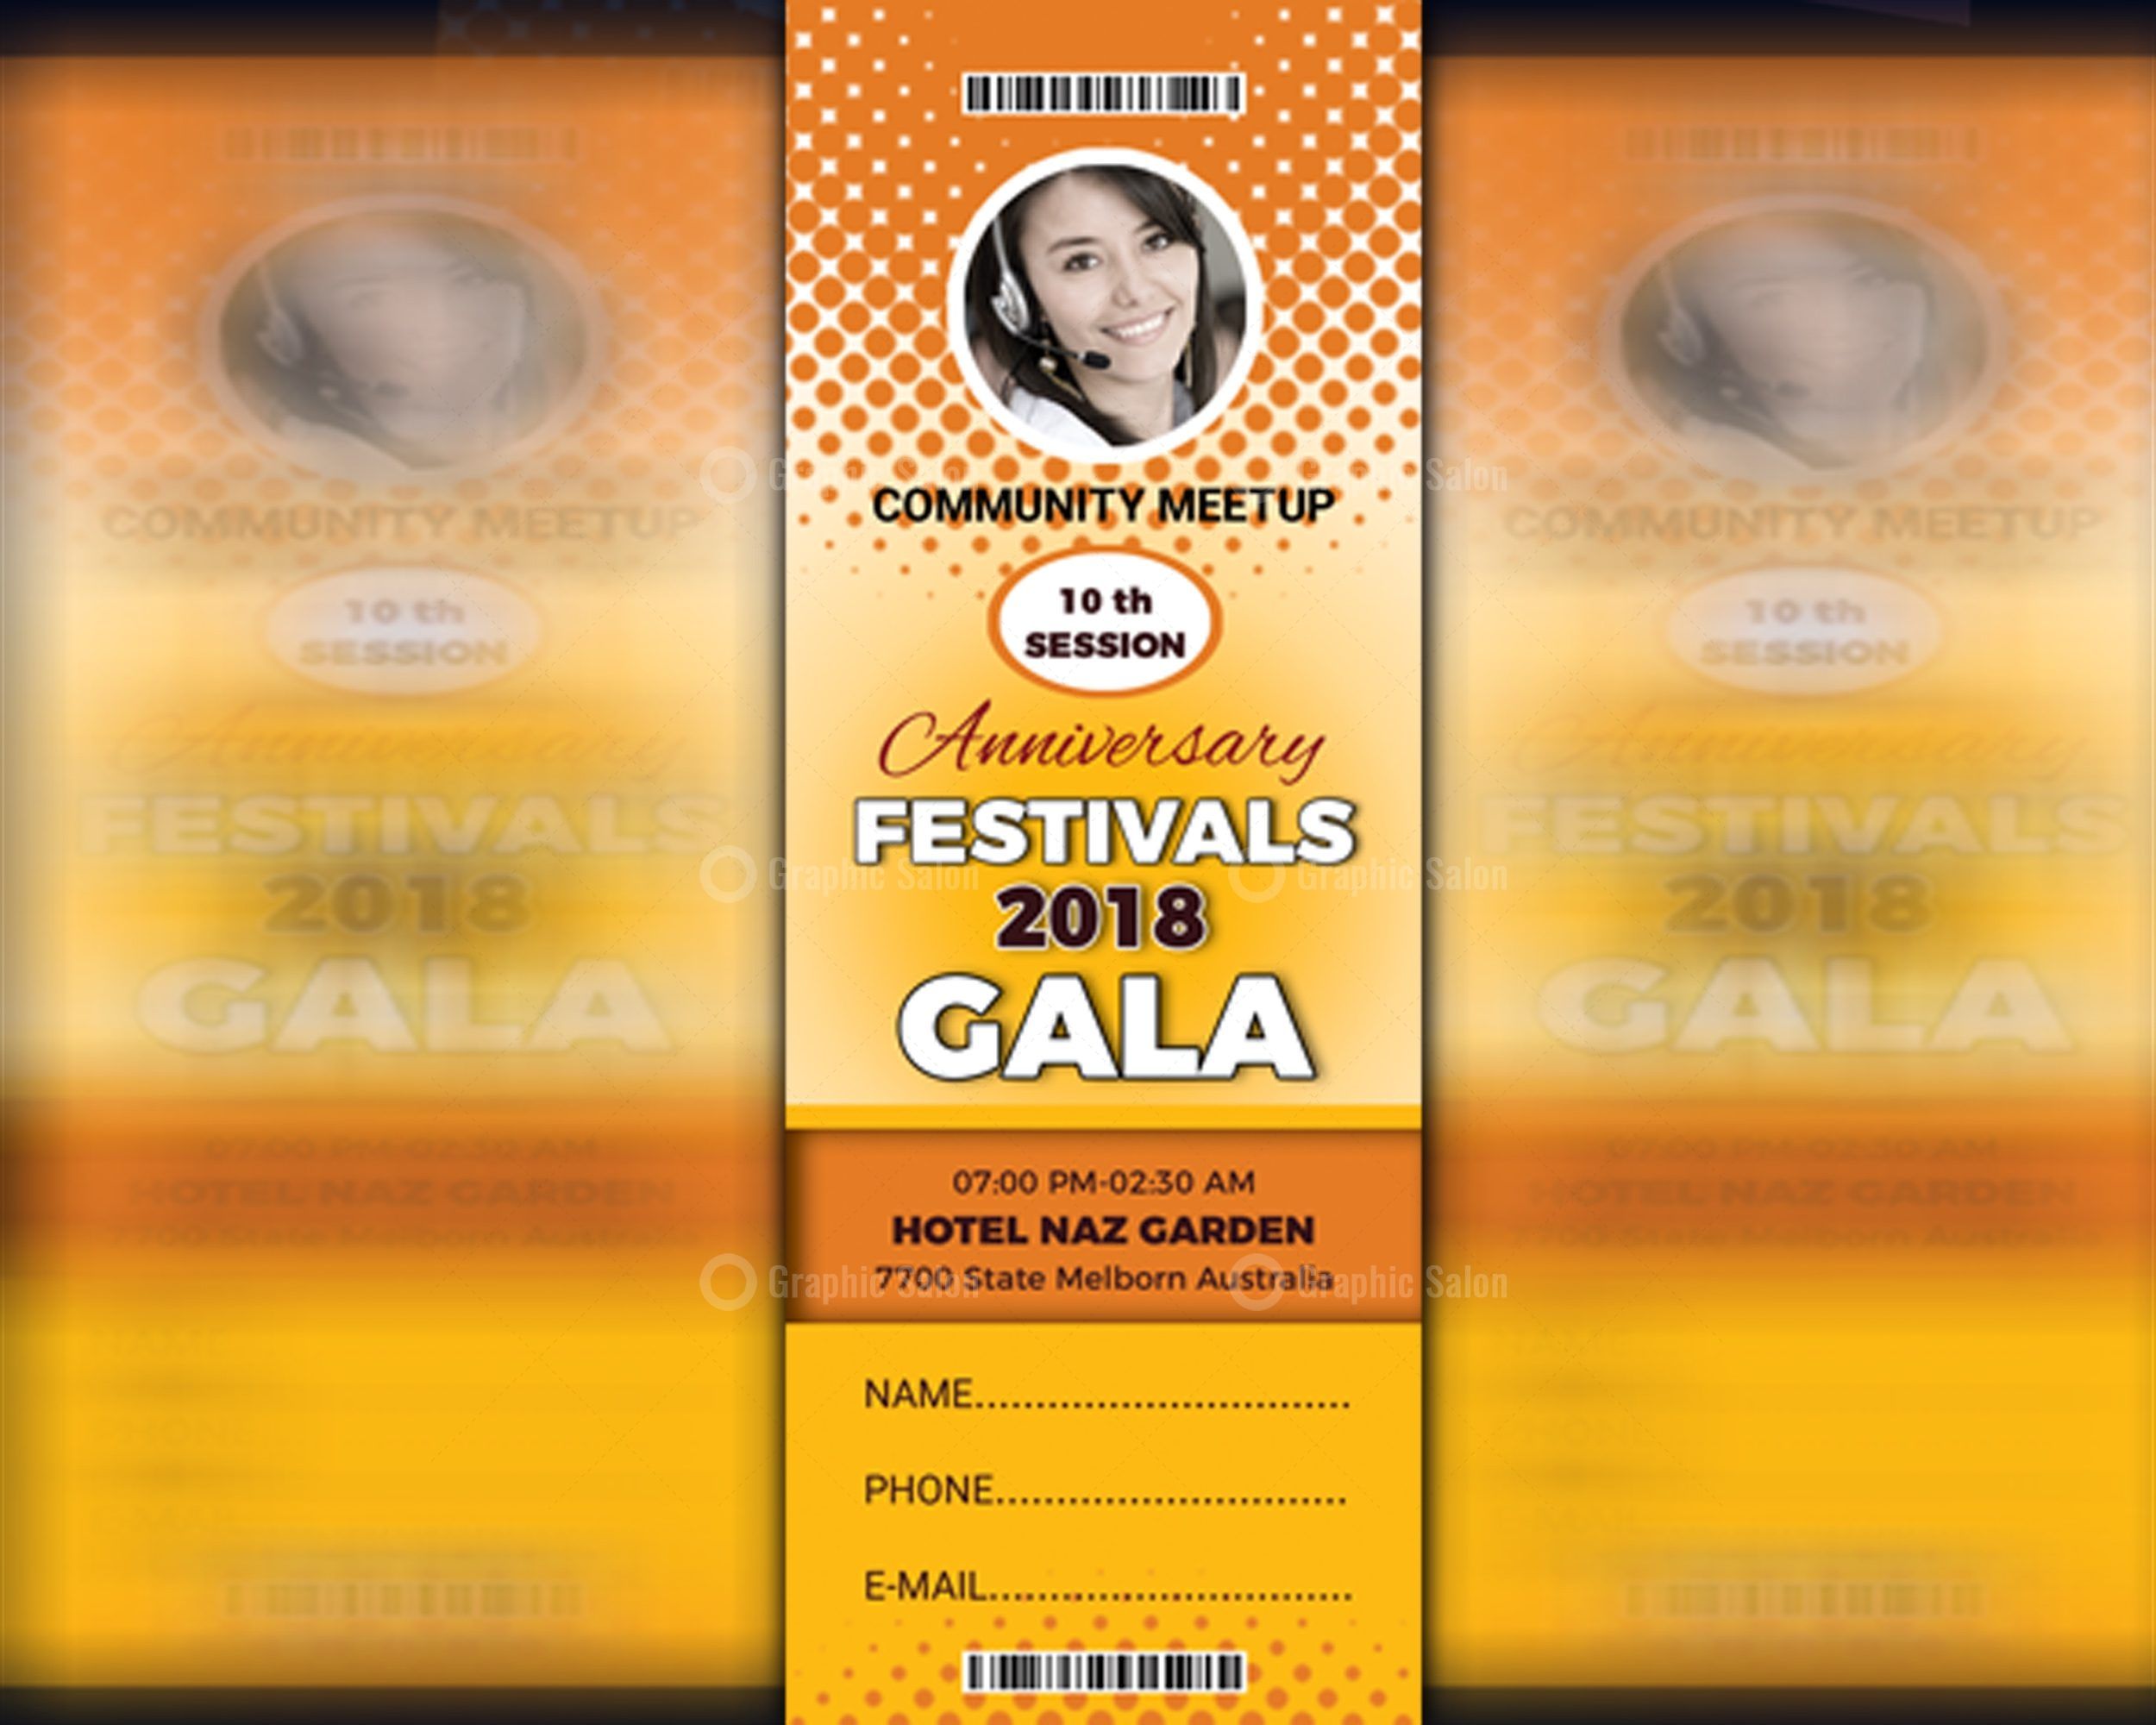 Festivals Event Ticket Template - Graphic Templates in 2020 | Event